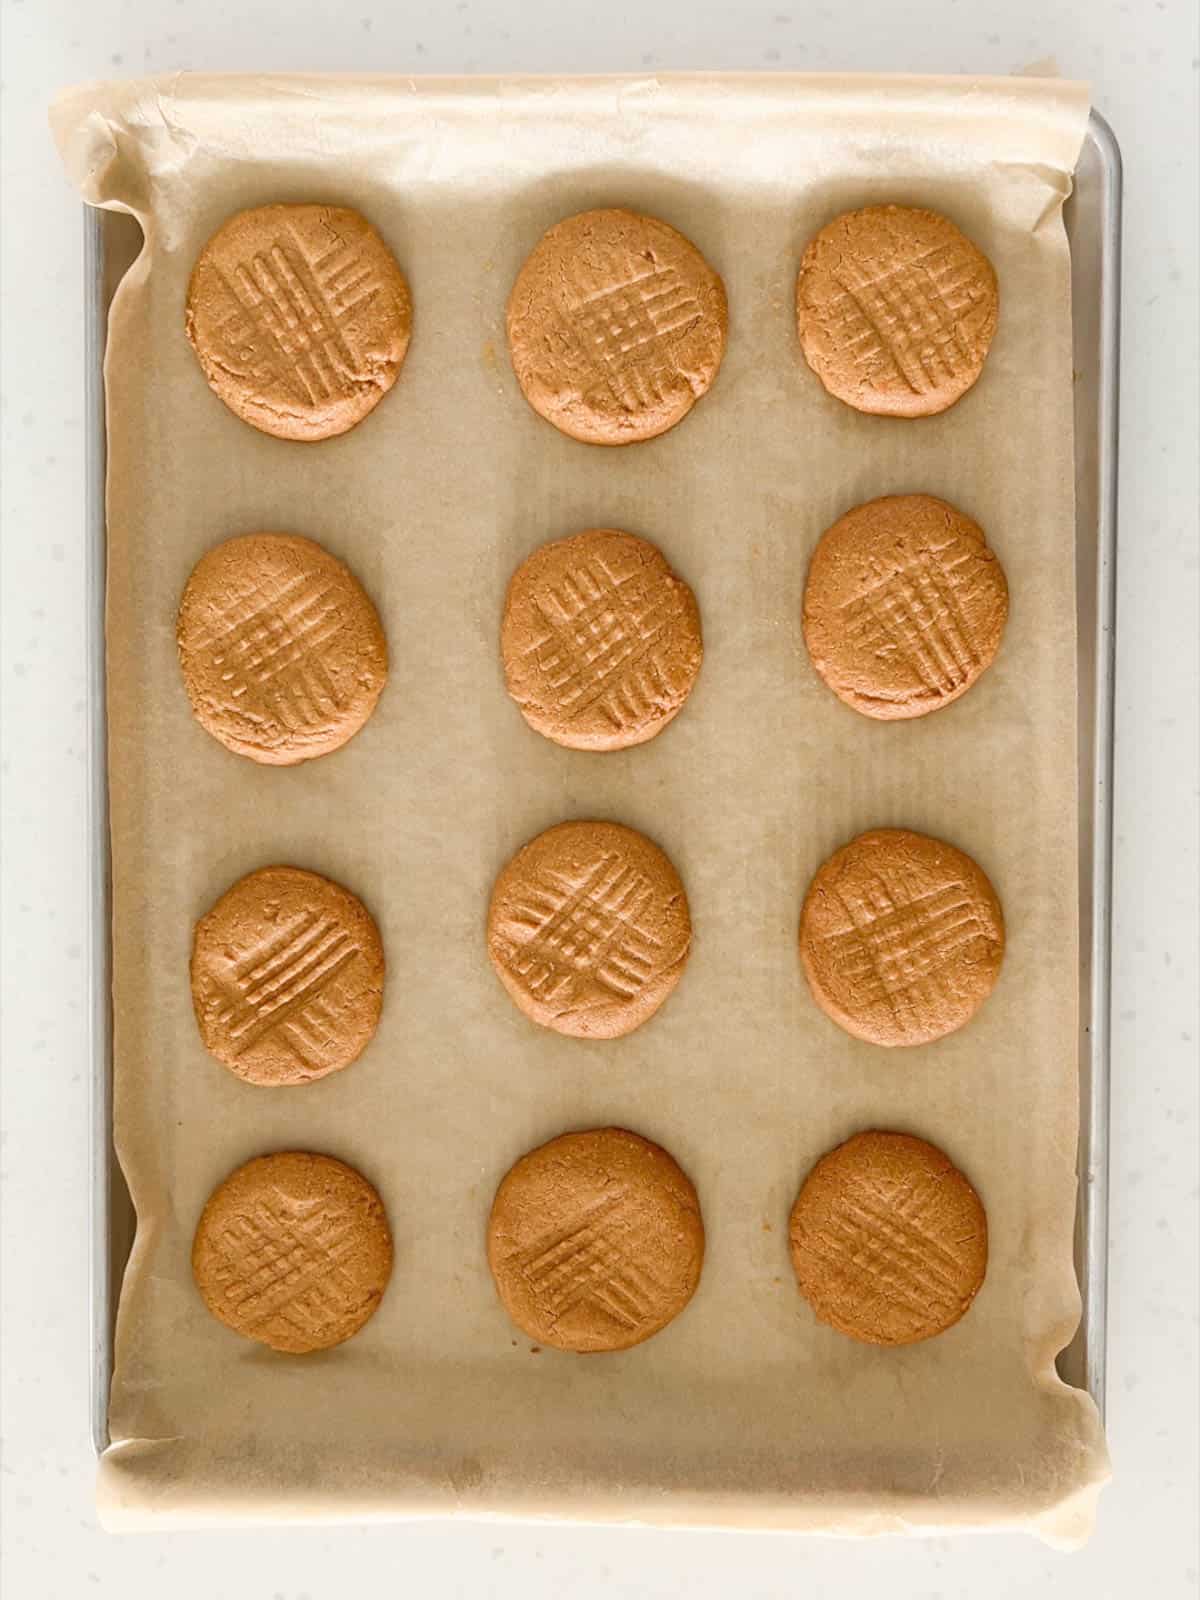 Peanut butter cookies are baked until the tops are dry and not shiny.